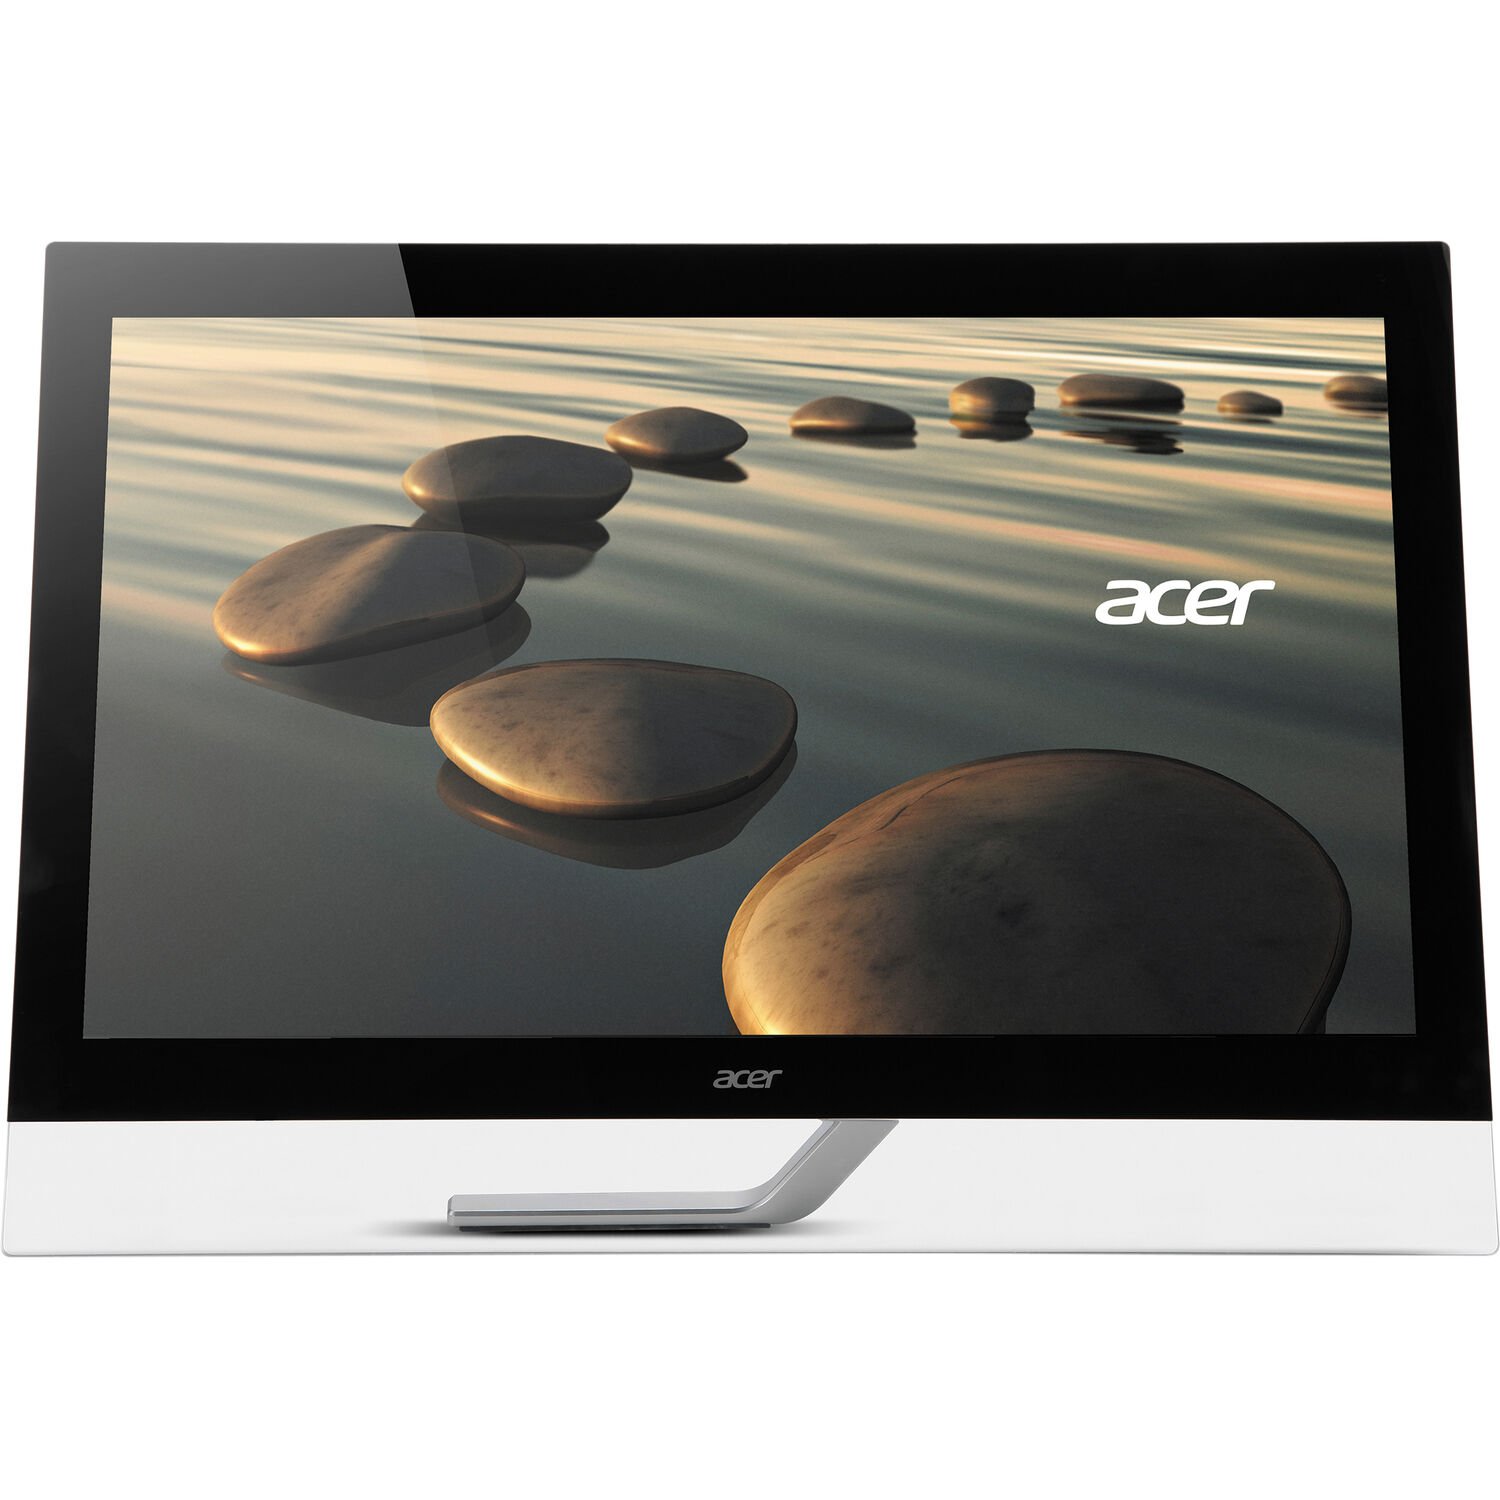 MONITOR ACER TOUCHSCREEN, FULL HD, MULTIMIDIA, 4MS, 60HZ, LED/IPS, T232HL-A